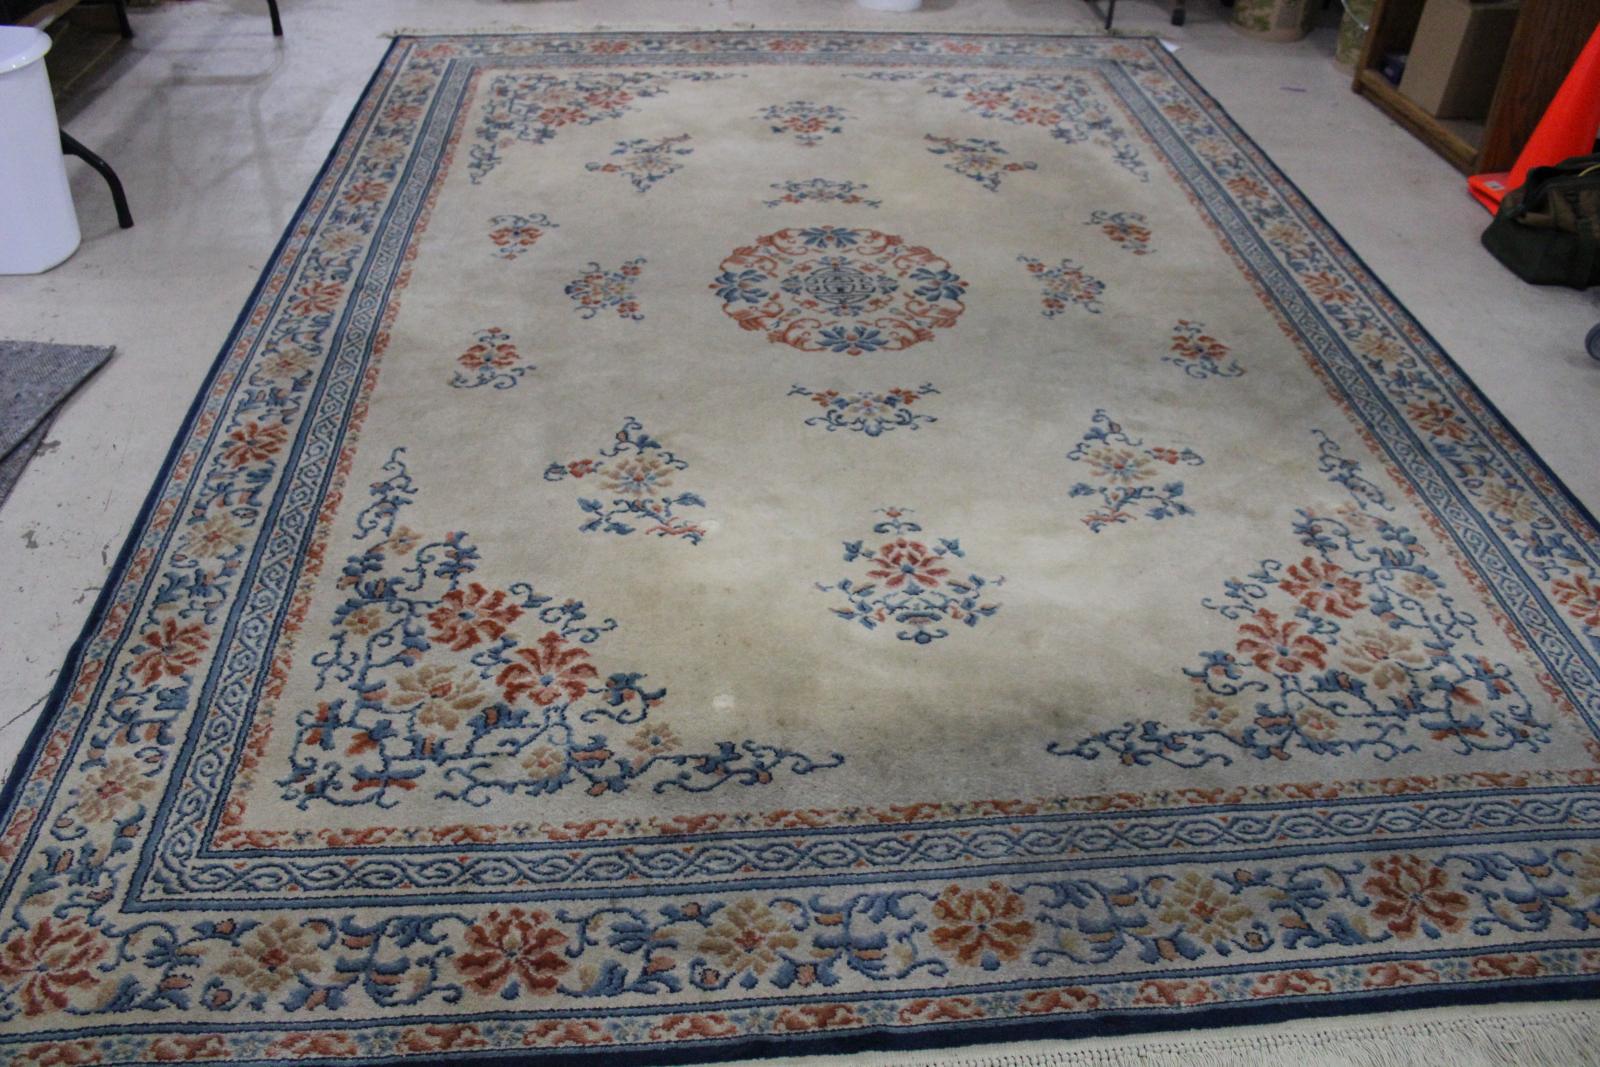 Prescott Rug Cleaner. What Can Ruin My Area Rugs?